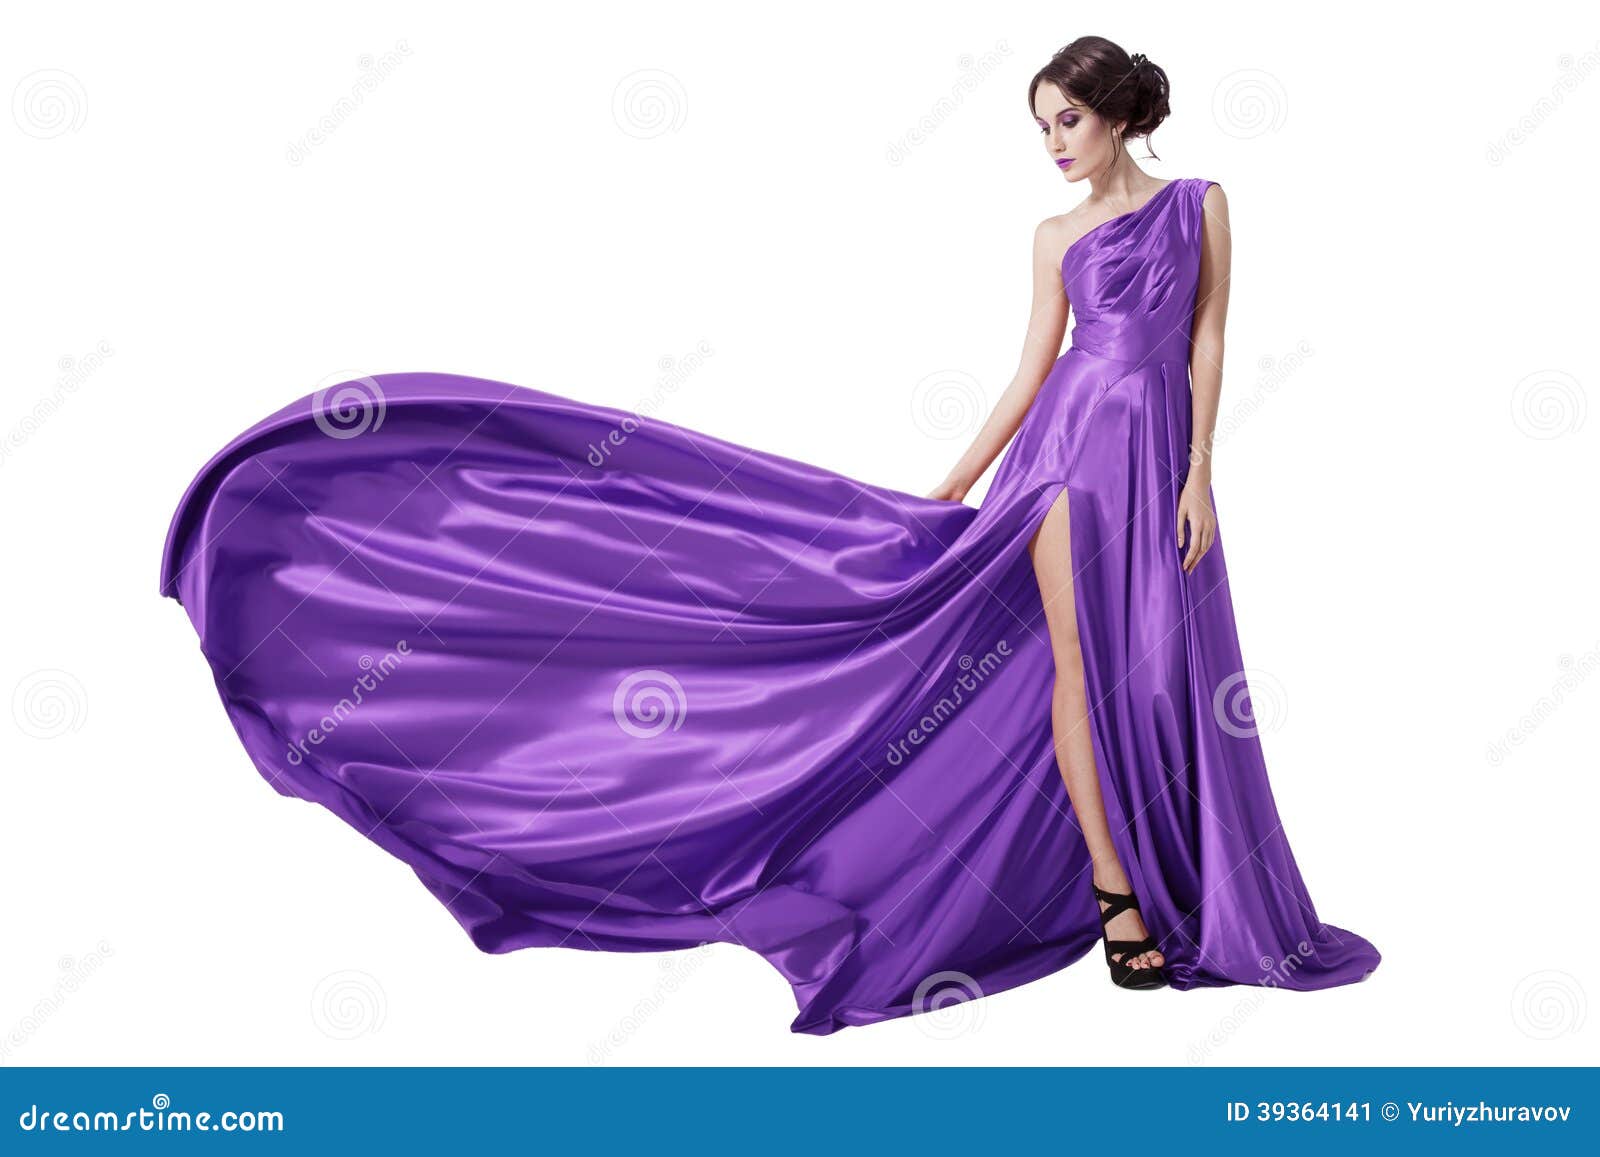 Young Beauty Woman in Fluttering Violet Dress. Isolated Stock Image ...